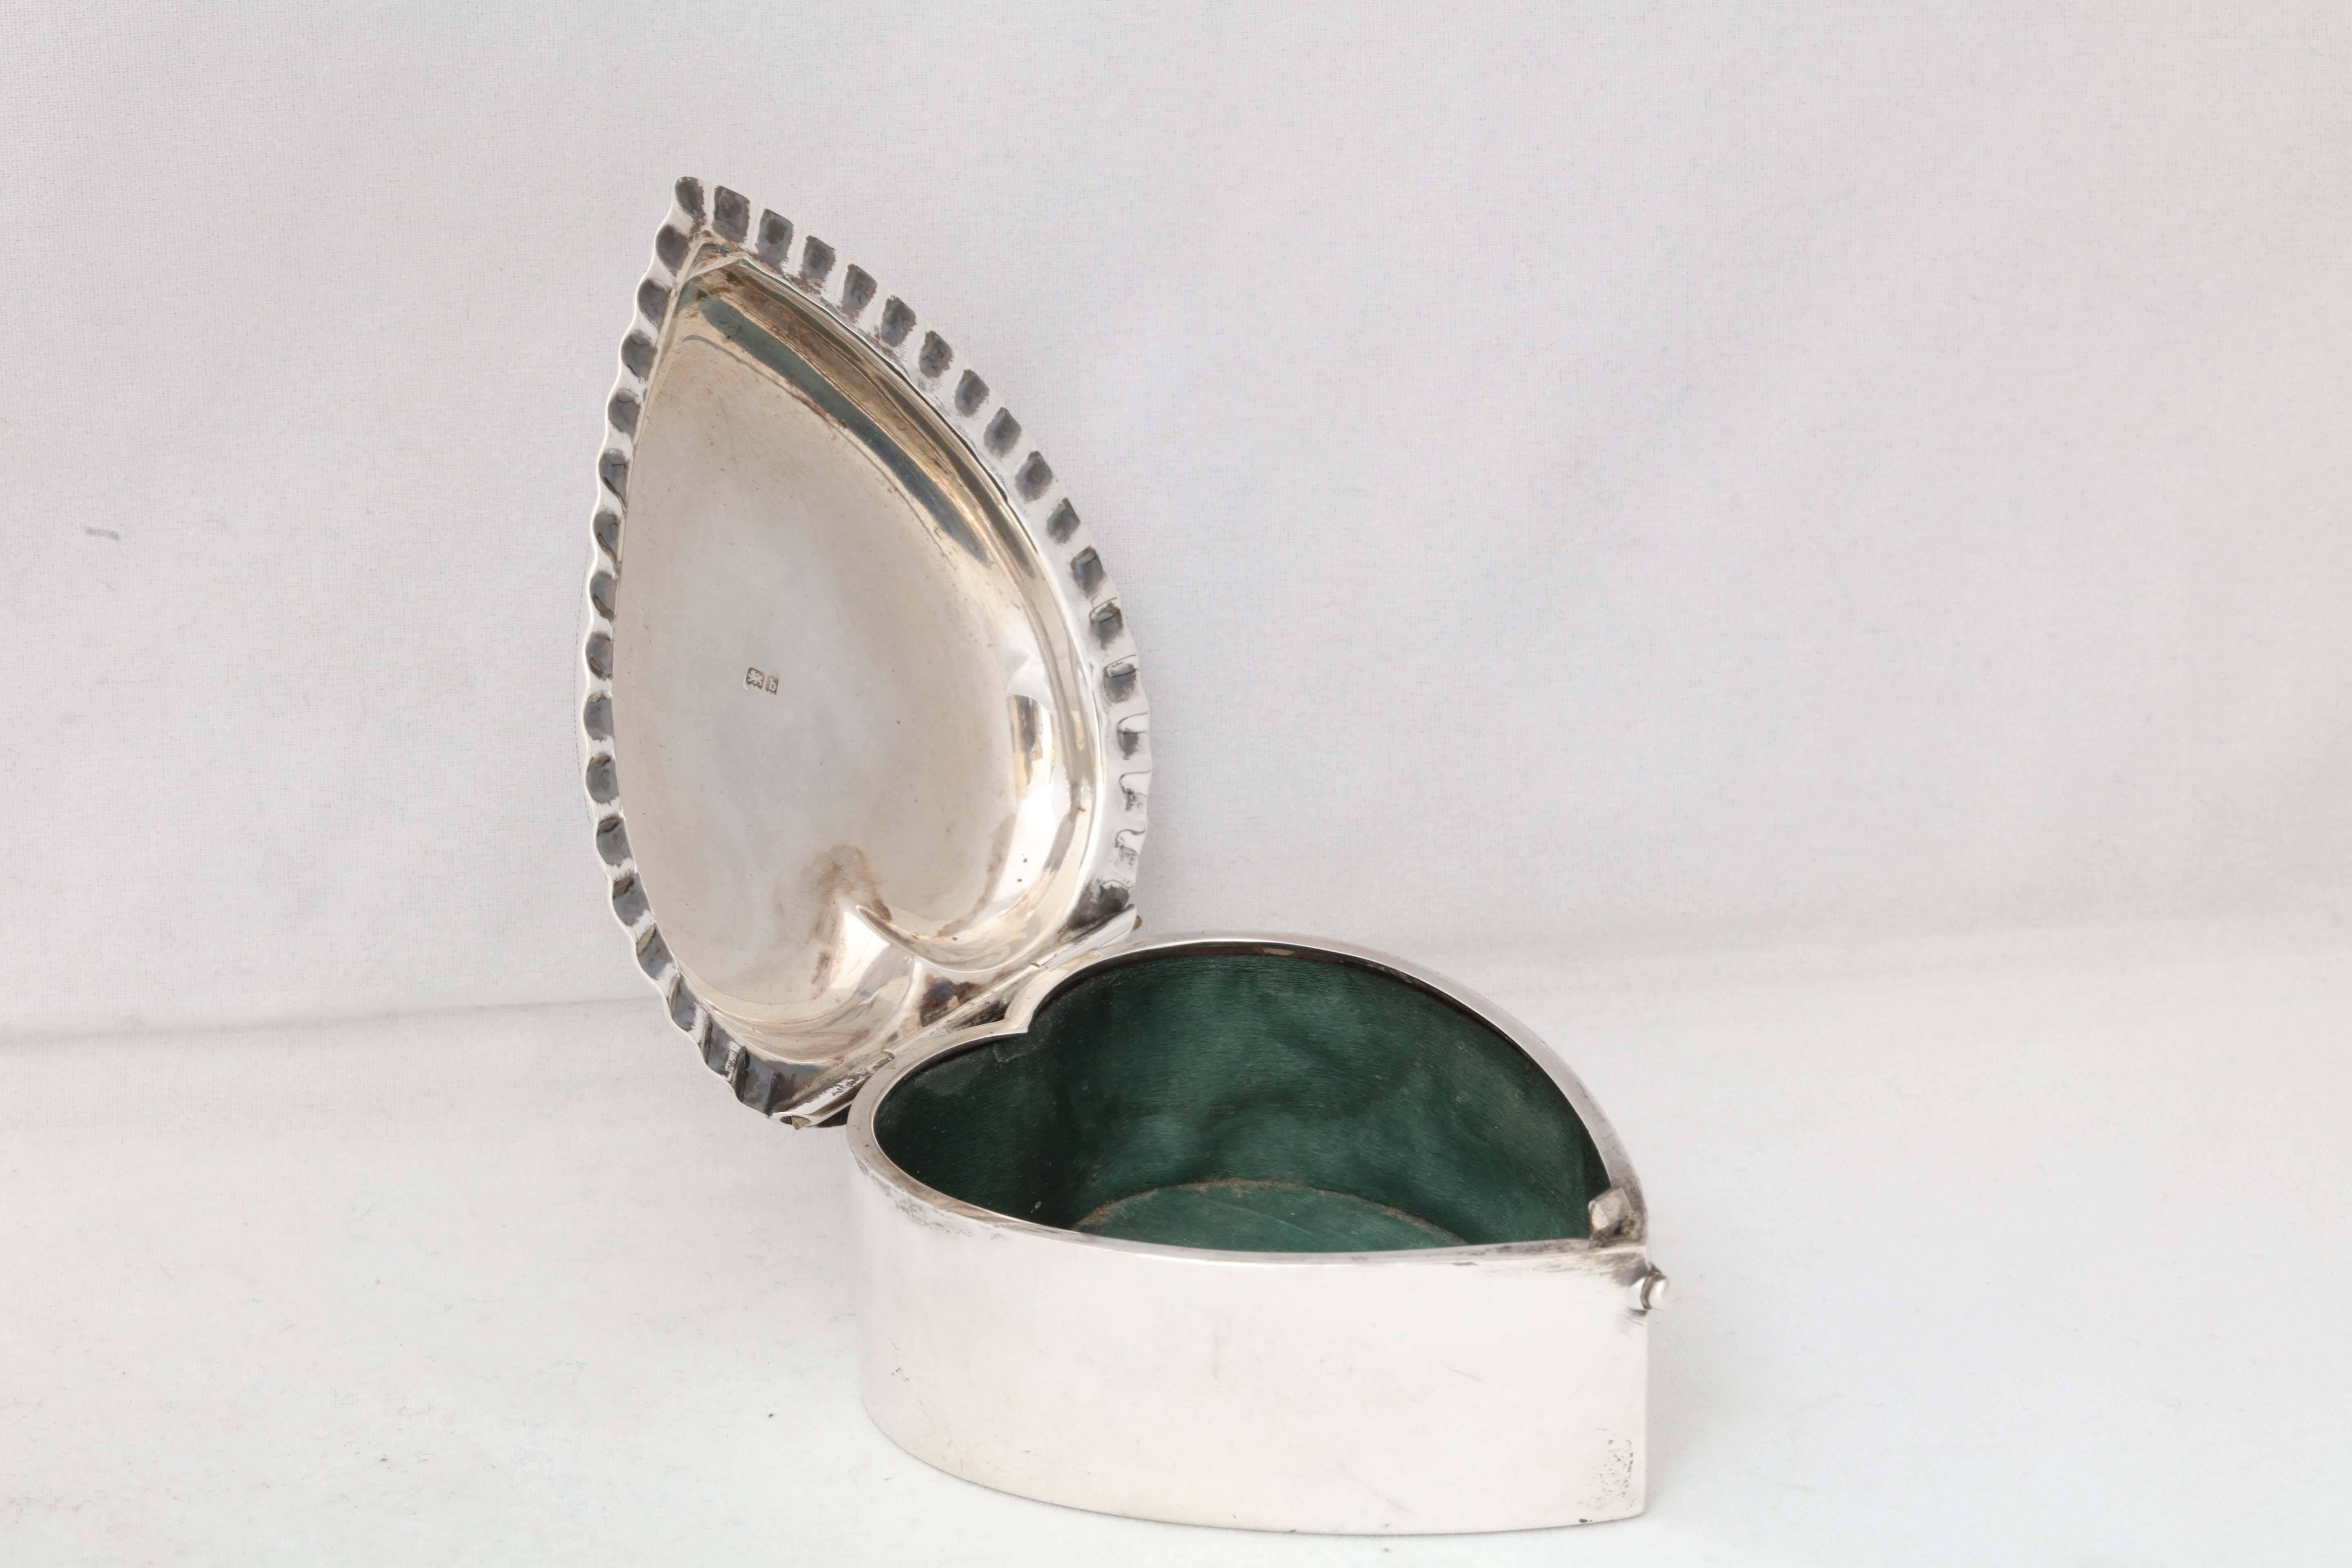 English Edwardian Sterling Silver and Agate Heart Form Box with Hinged Lid, Irish Motif